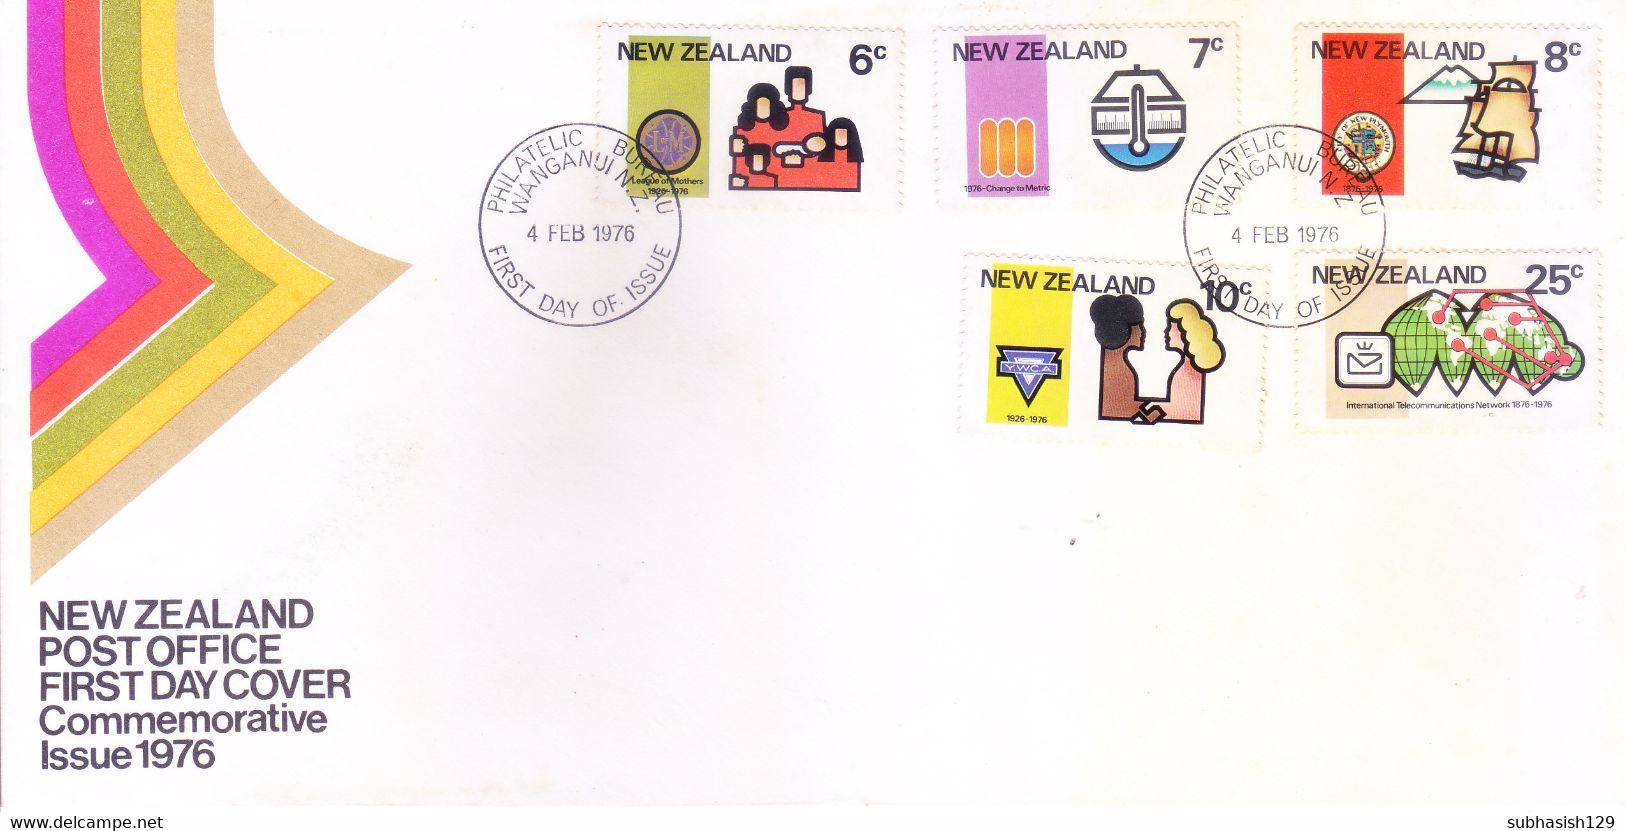 NEW ZEALAND : FIRST DAY COVER : 04 FEBRUARY 1976 : SET OF 5 : ANNIVERSARIES AND EVENTS - Lettres & Documents